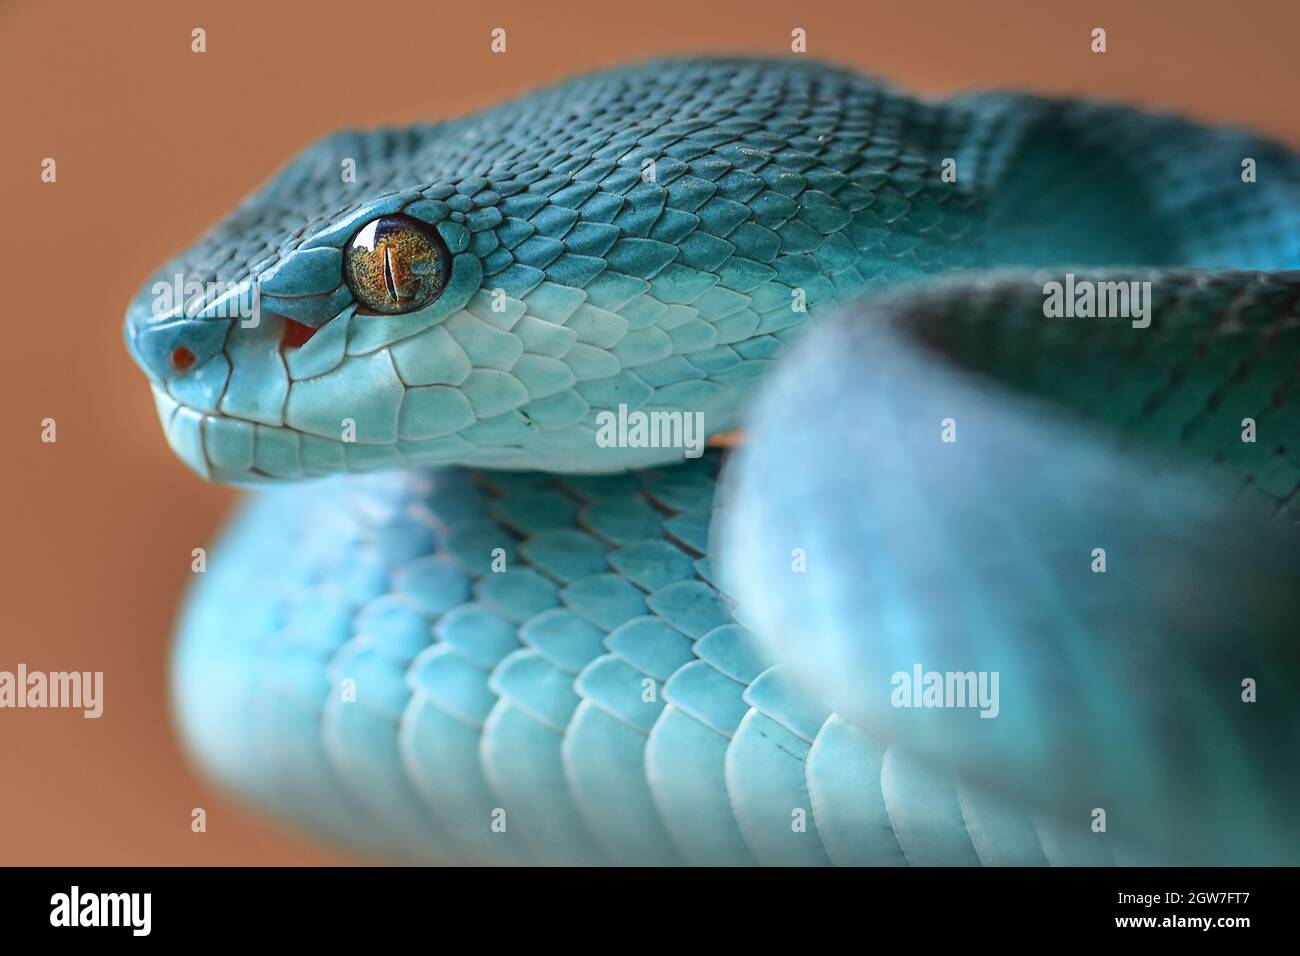 Can Carry a Square Three-in-one Data Cable Blue Pit Viper from Indonesia 